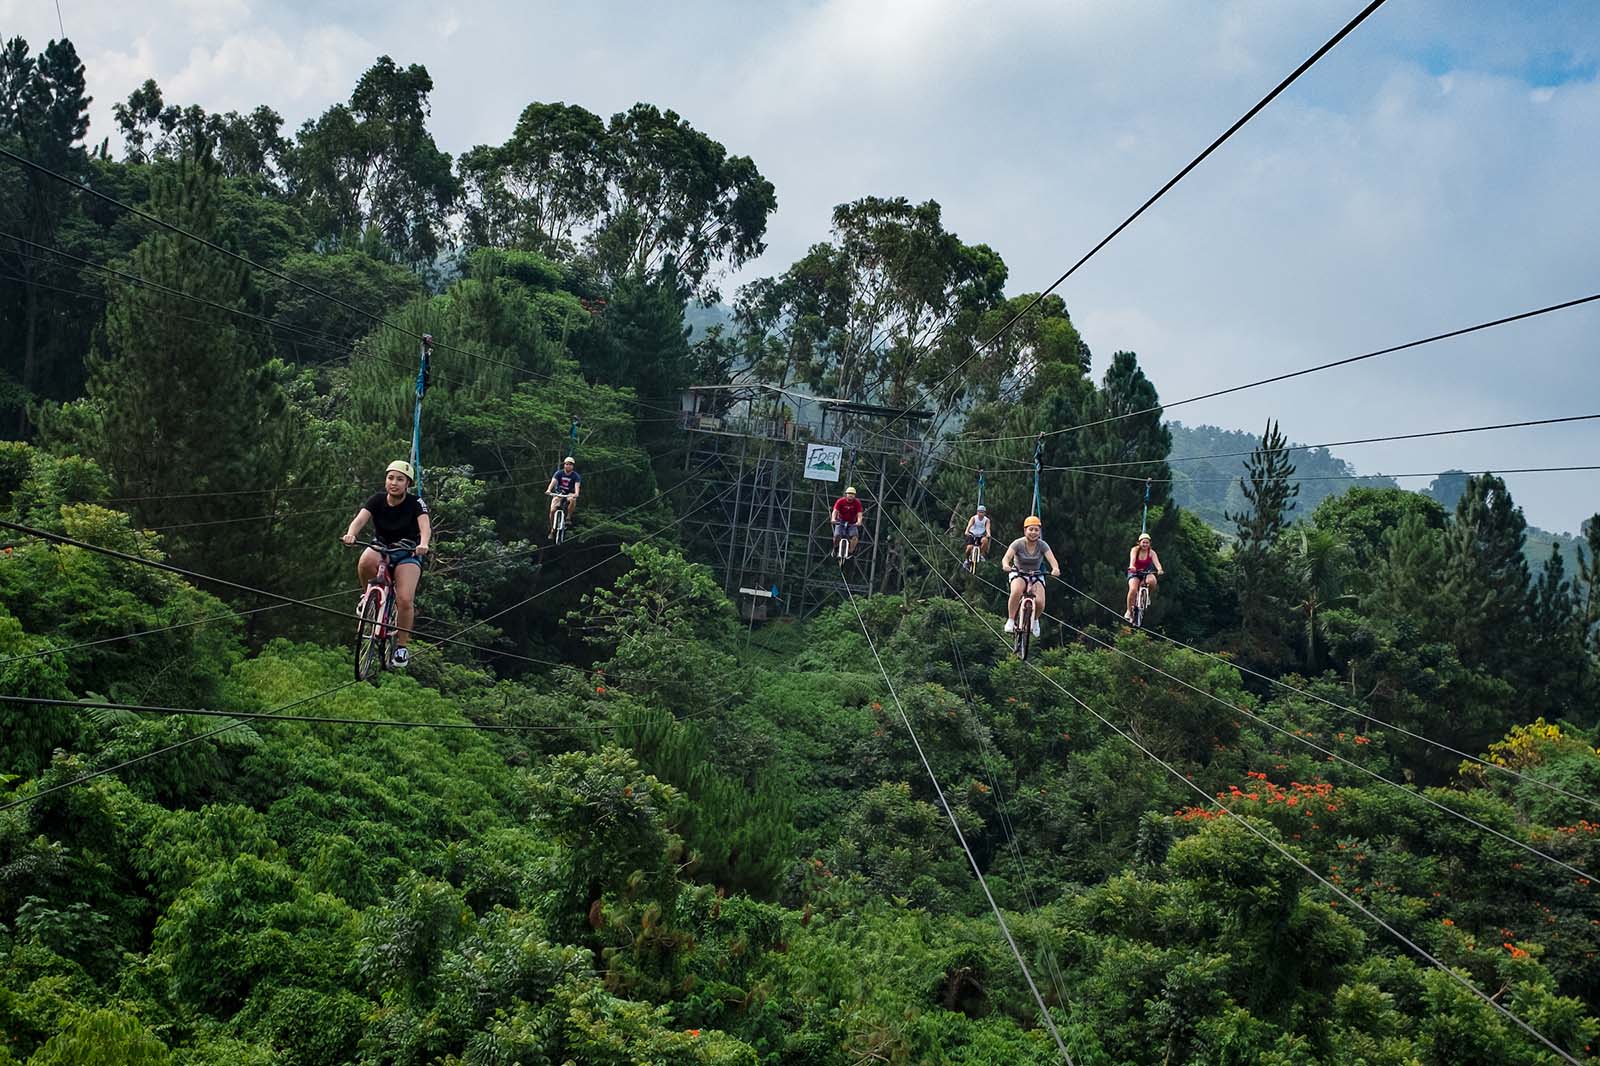 Eden Nature Park and Resort skycycle ride, Davao